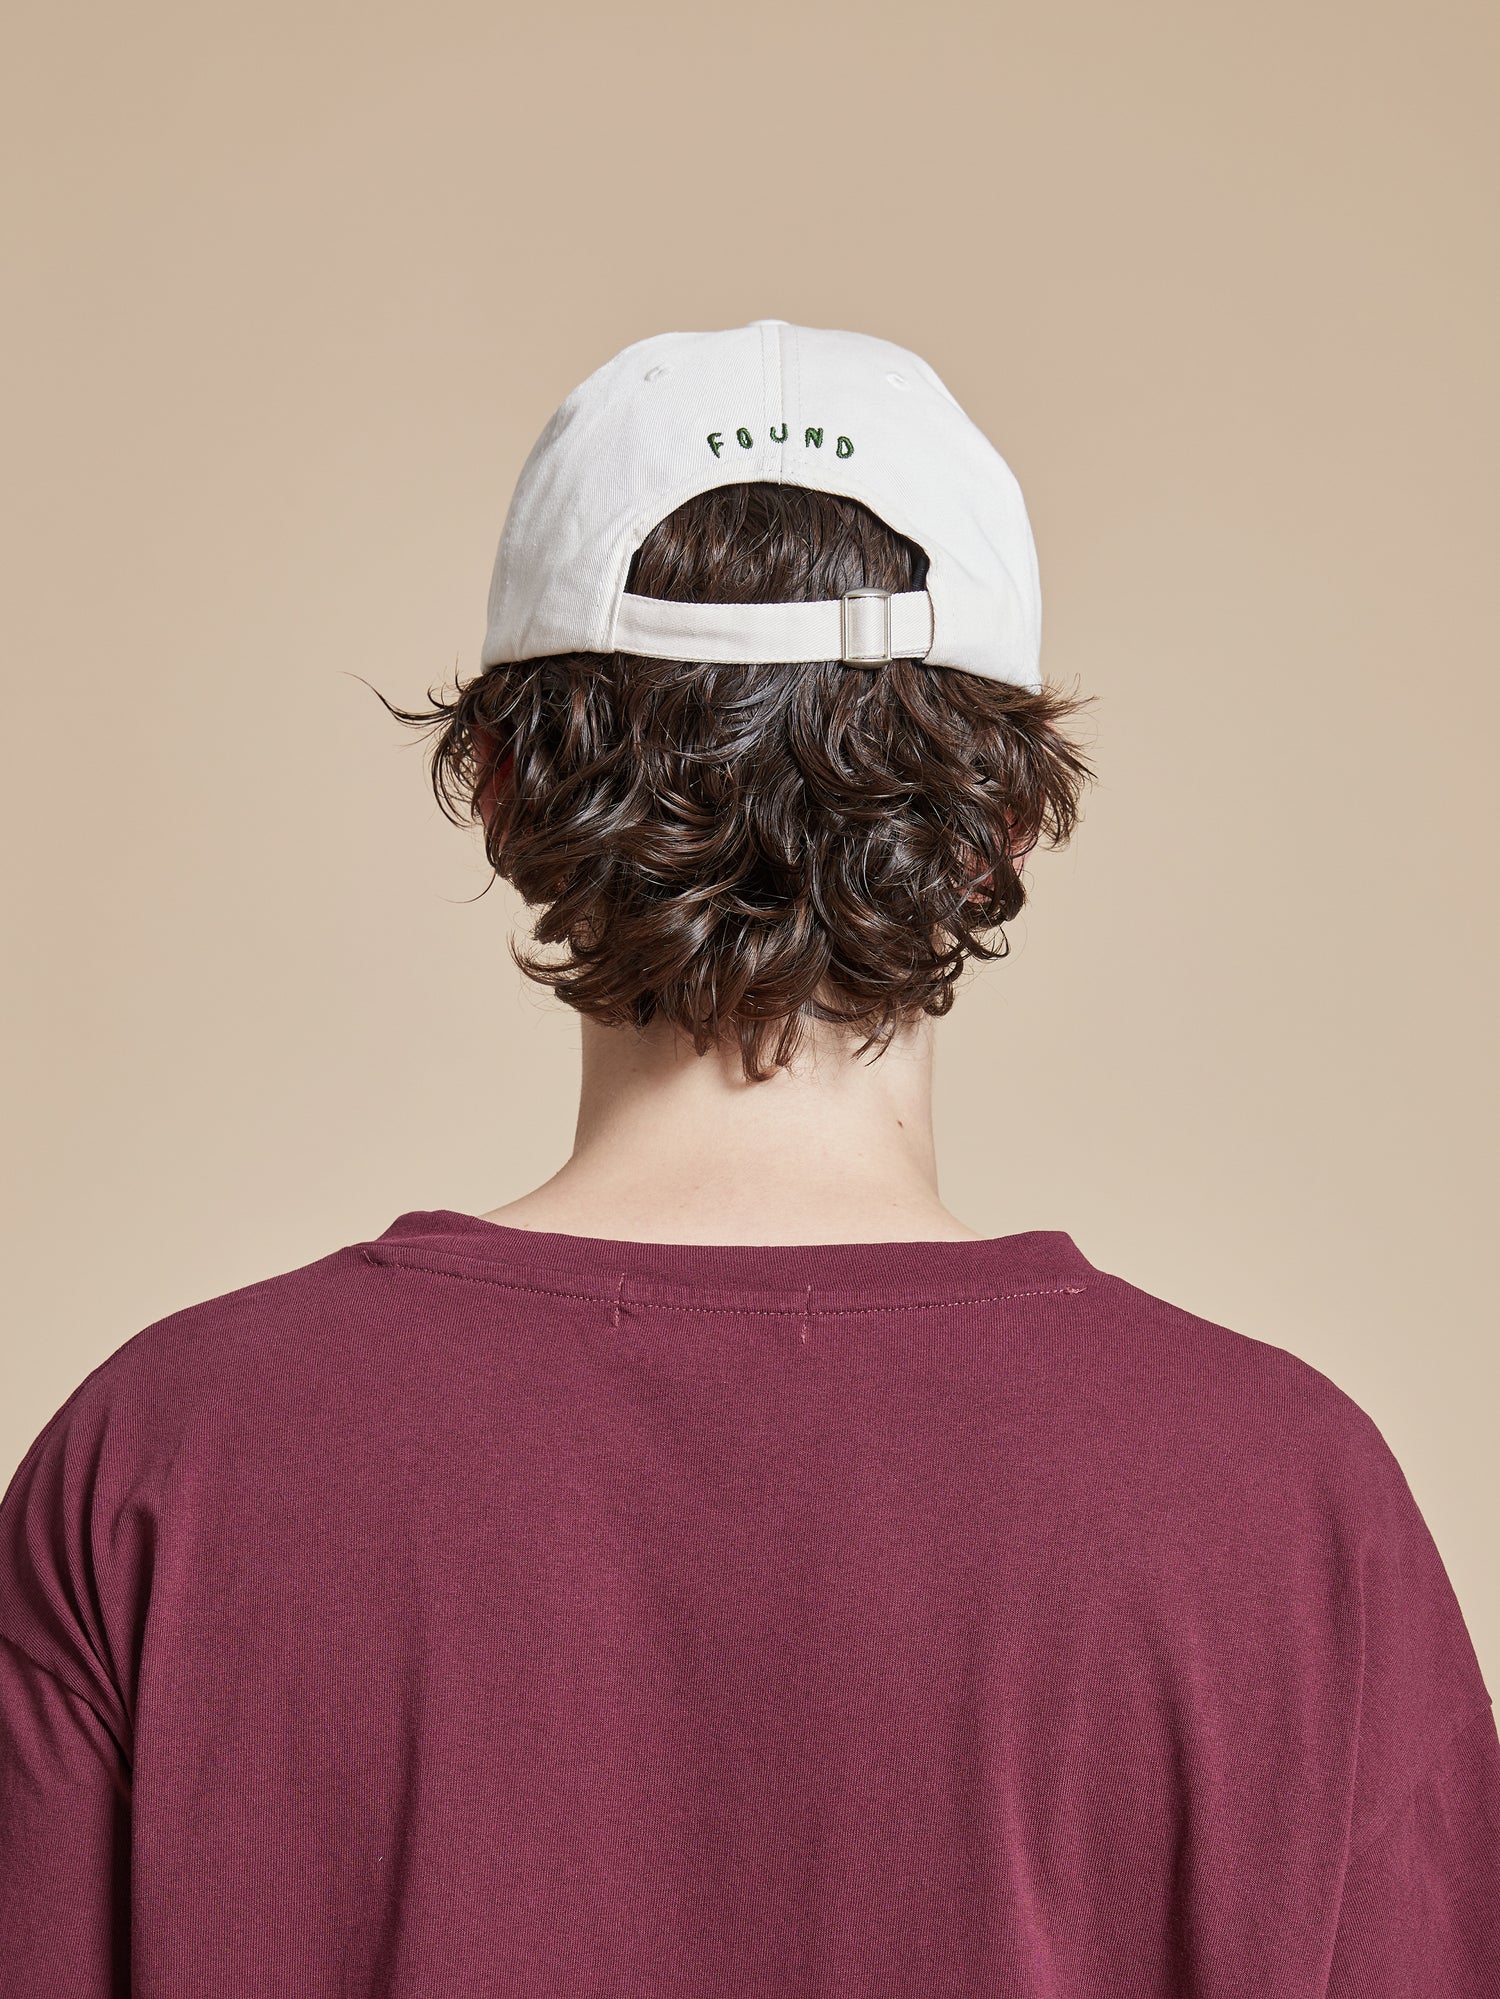 The back view of a man wearing a burgundy t-shirt and a Found Horse Equine Cap.